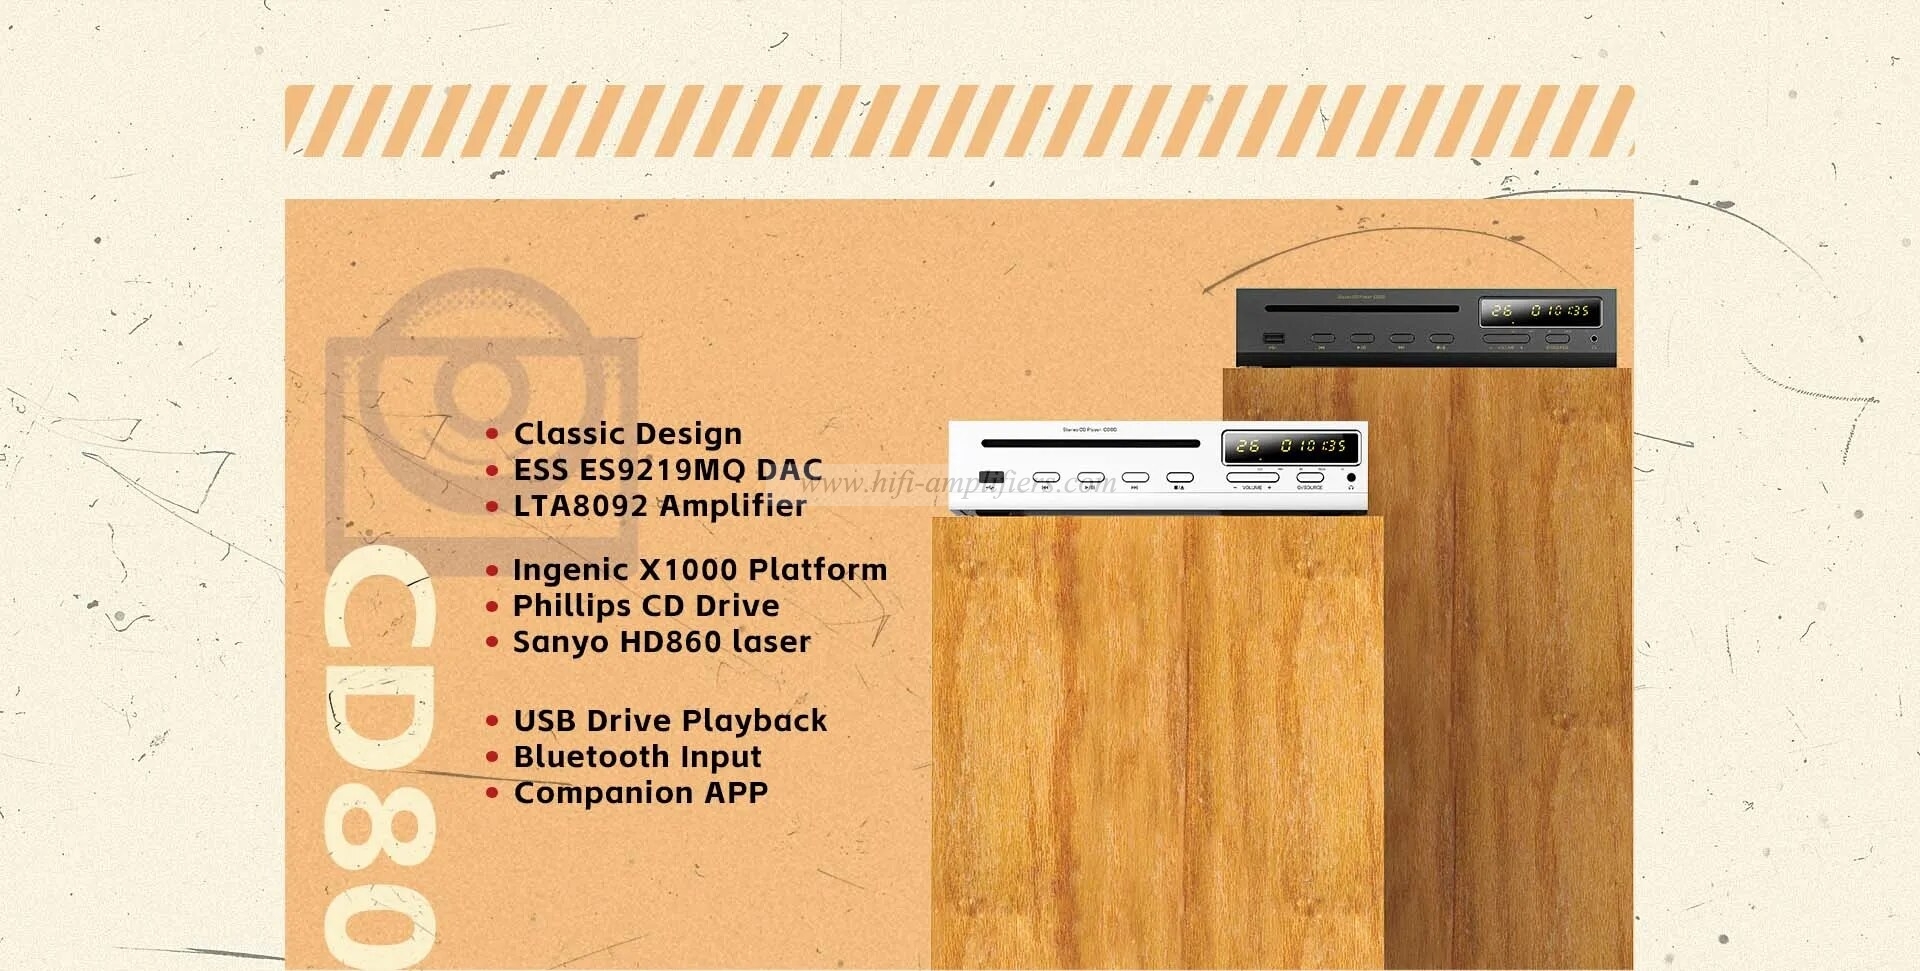 Shanling CD80/CA80 CD Player & Power Amplifier all-in-one Mini Bluetooth 5.0 Drive DSD Decode